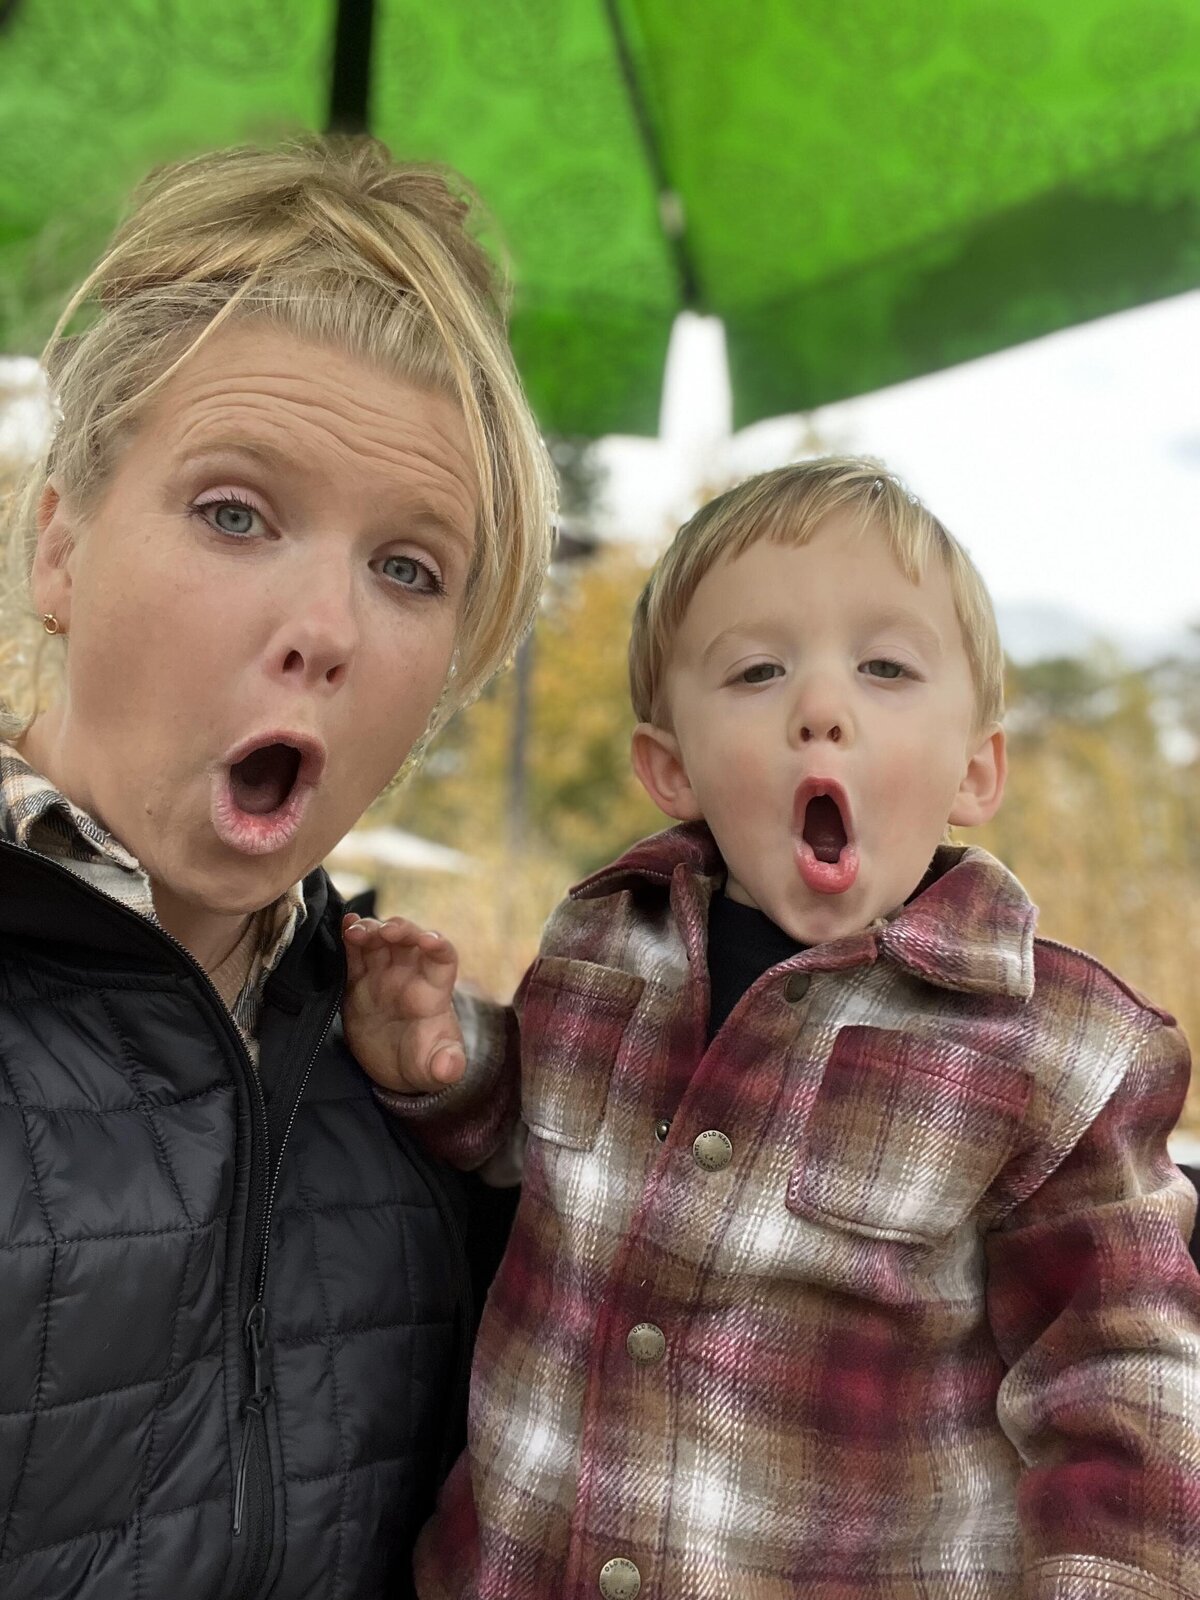 Toddler and mom make funny faces at the camera at playplace